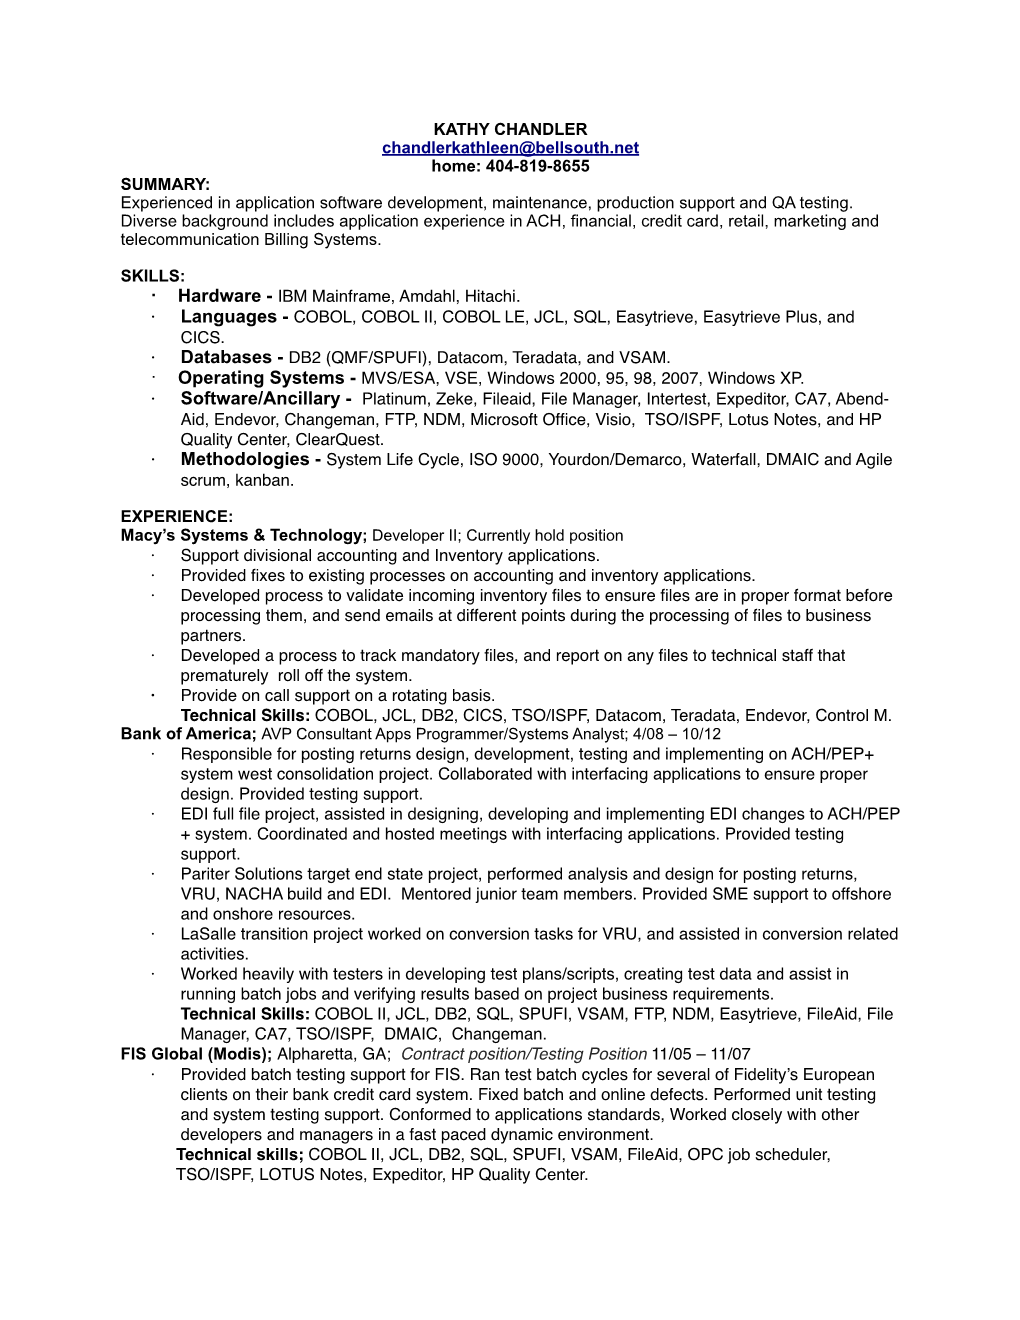 Resume KC10 0511.Pages